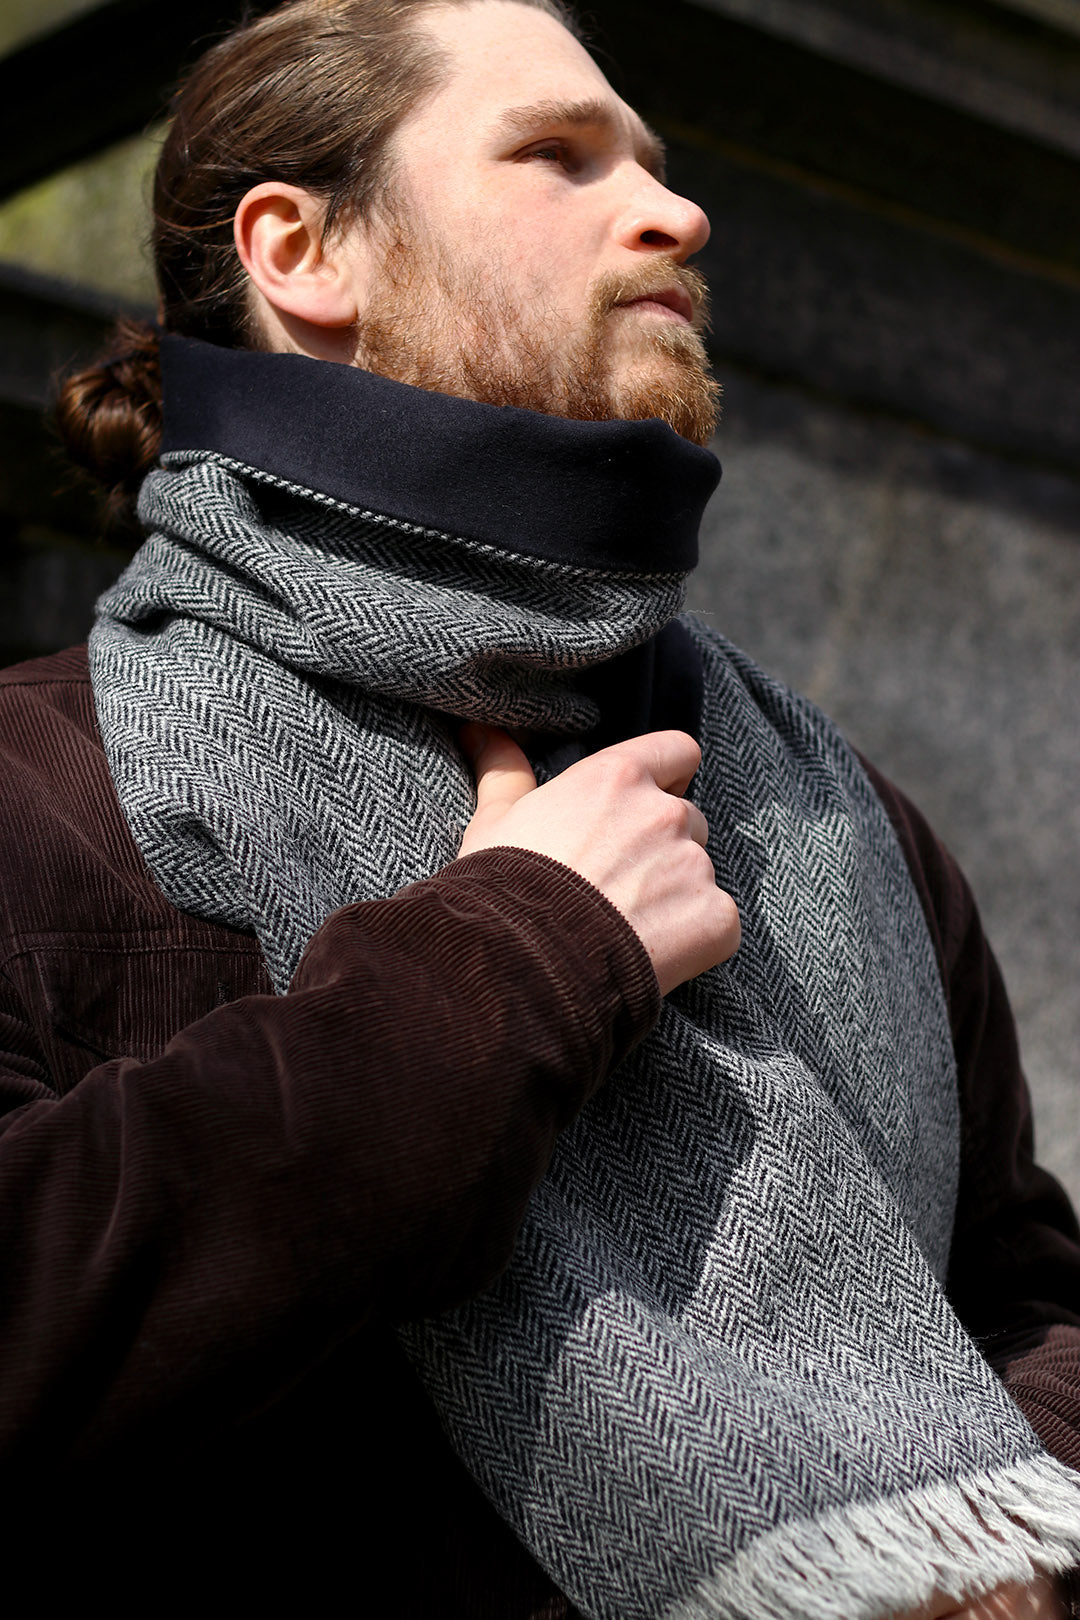 Scottish Textile Showcase Lusken scarf made with grey herringbone Harris Tweed and cashmere lining and pin fringe